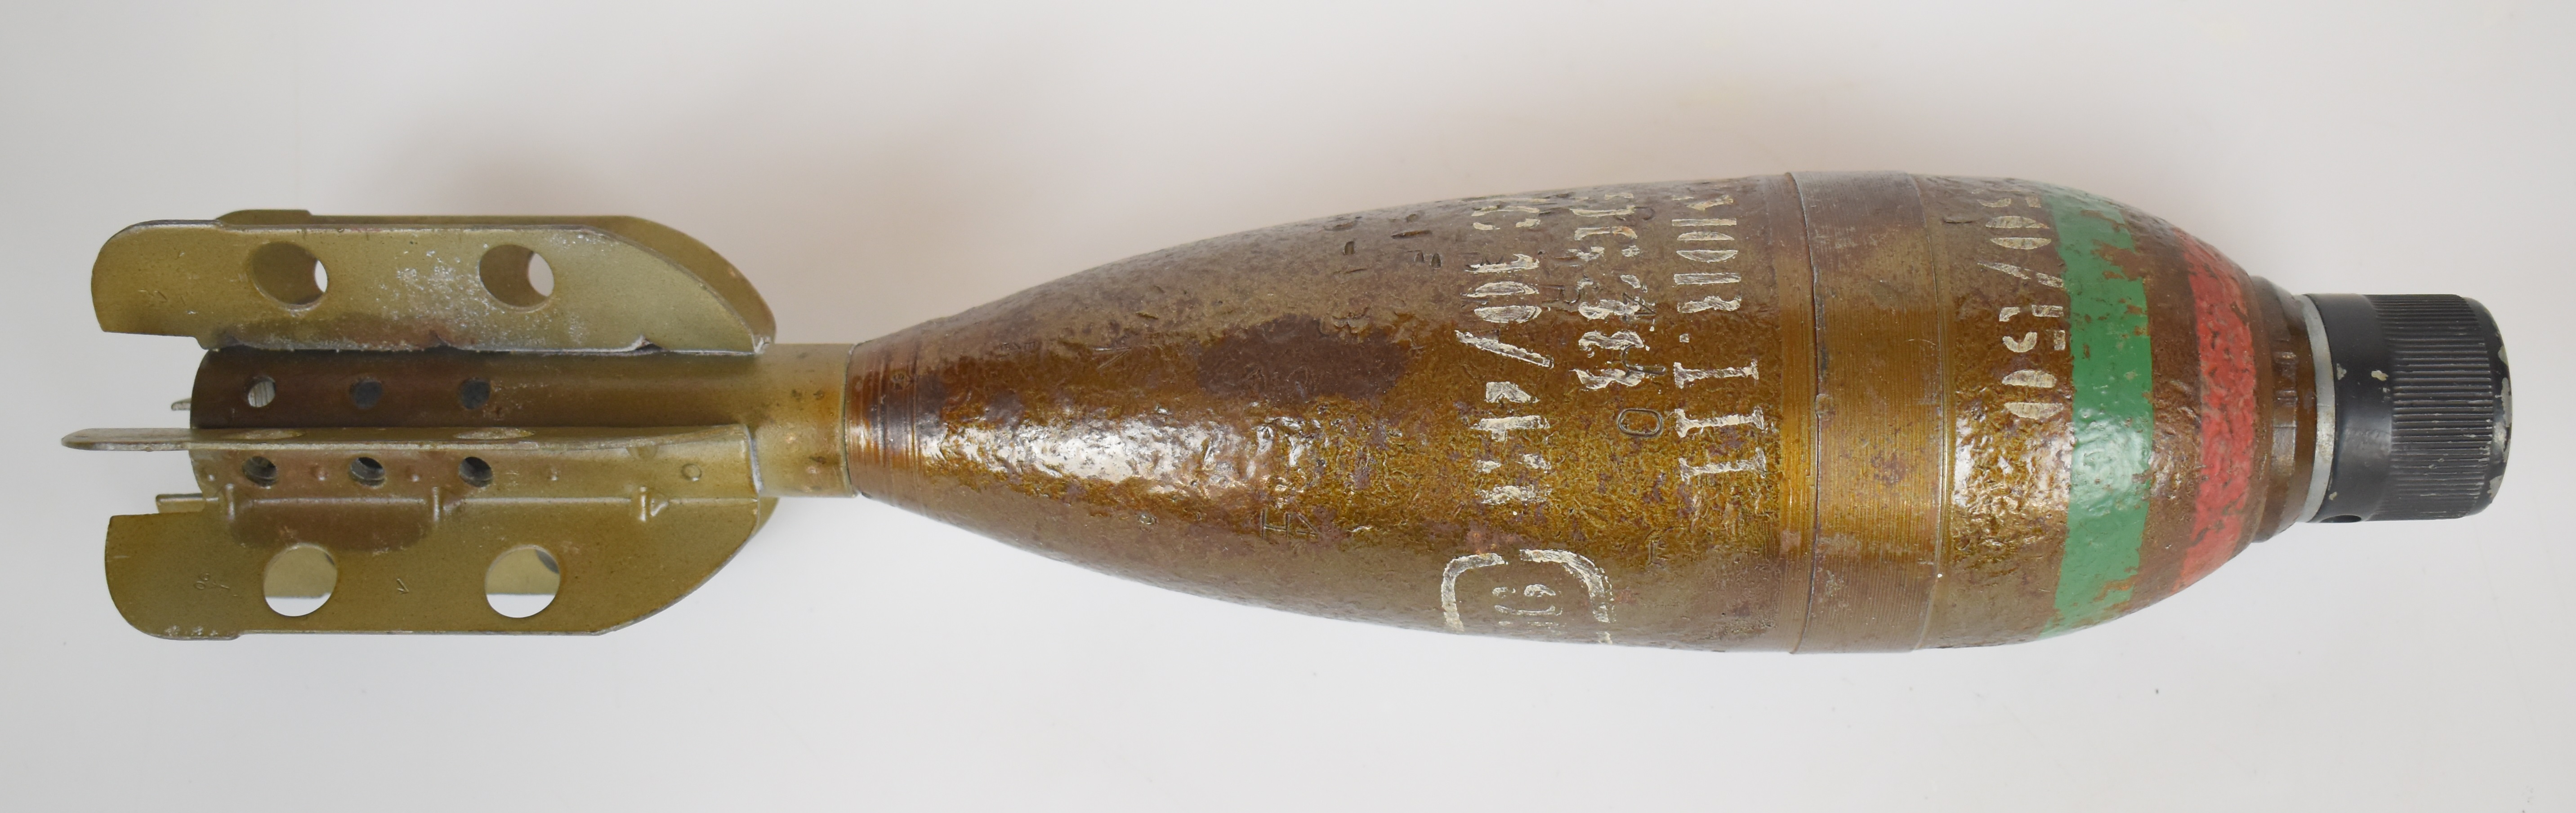 British WW2 3 inch inert mortar round dated 11/43 with fuse and cap - Image 3 of 4